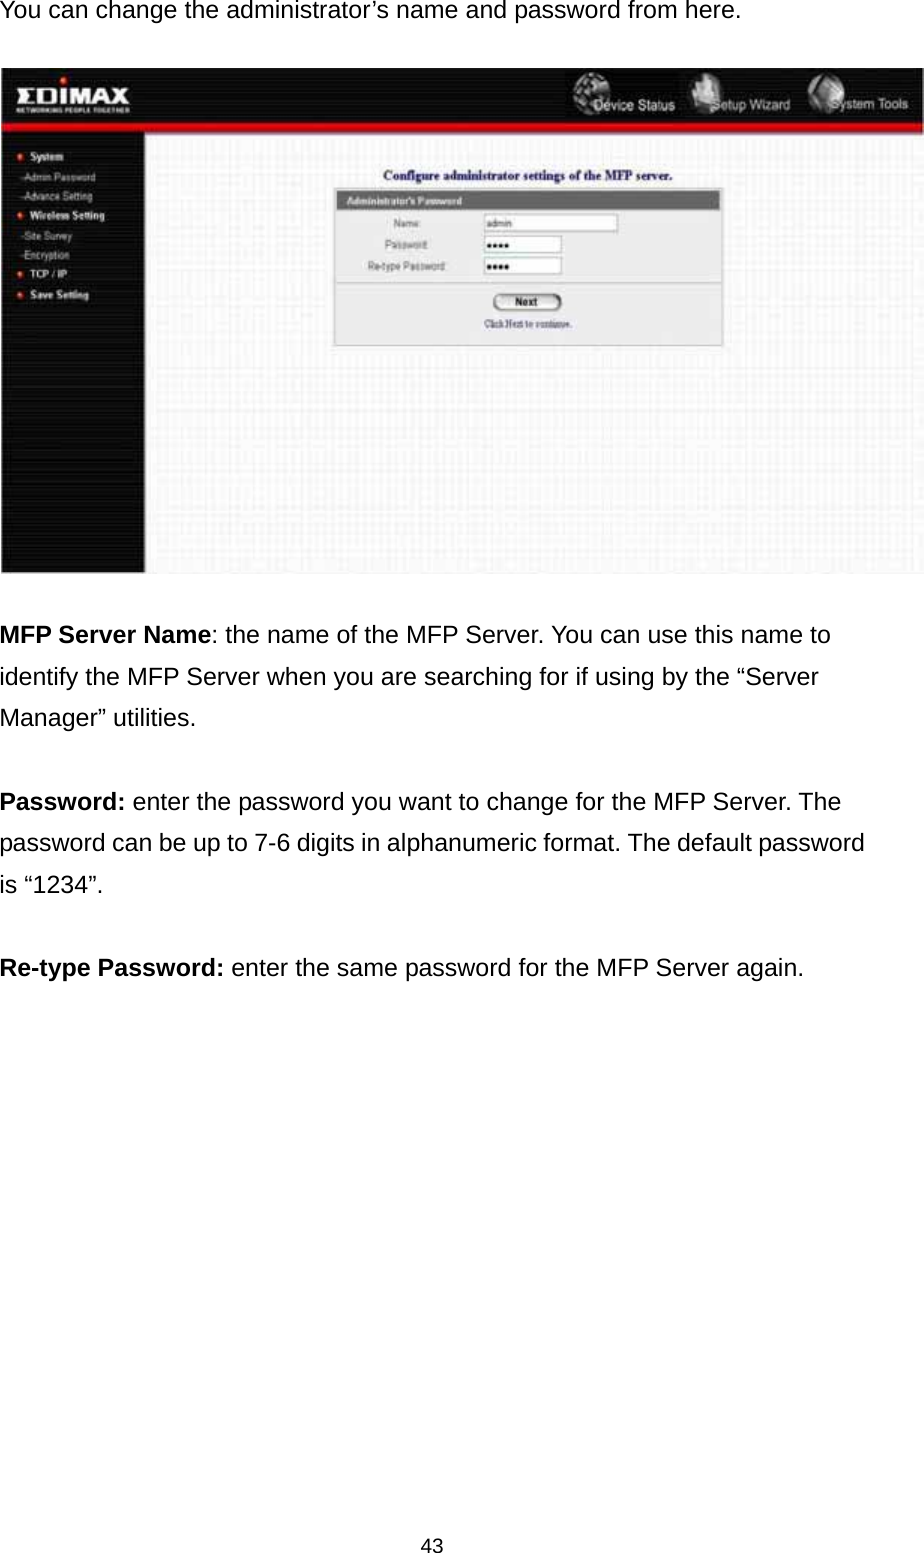 43 You can change the administrator’s name and password from here.   MFP Server Name: the name of the MFP Server. You can use this name to identify the MFP Server when you are searching for if using by the “Server Manager” utilities.  Password: enter the password you want to change for the MFP Server. The password can be up to 7-6 digits in alphanumeric format. The default password is “1234”.  Re-type Password: enter the same password for the MFP Server again. 